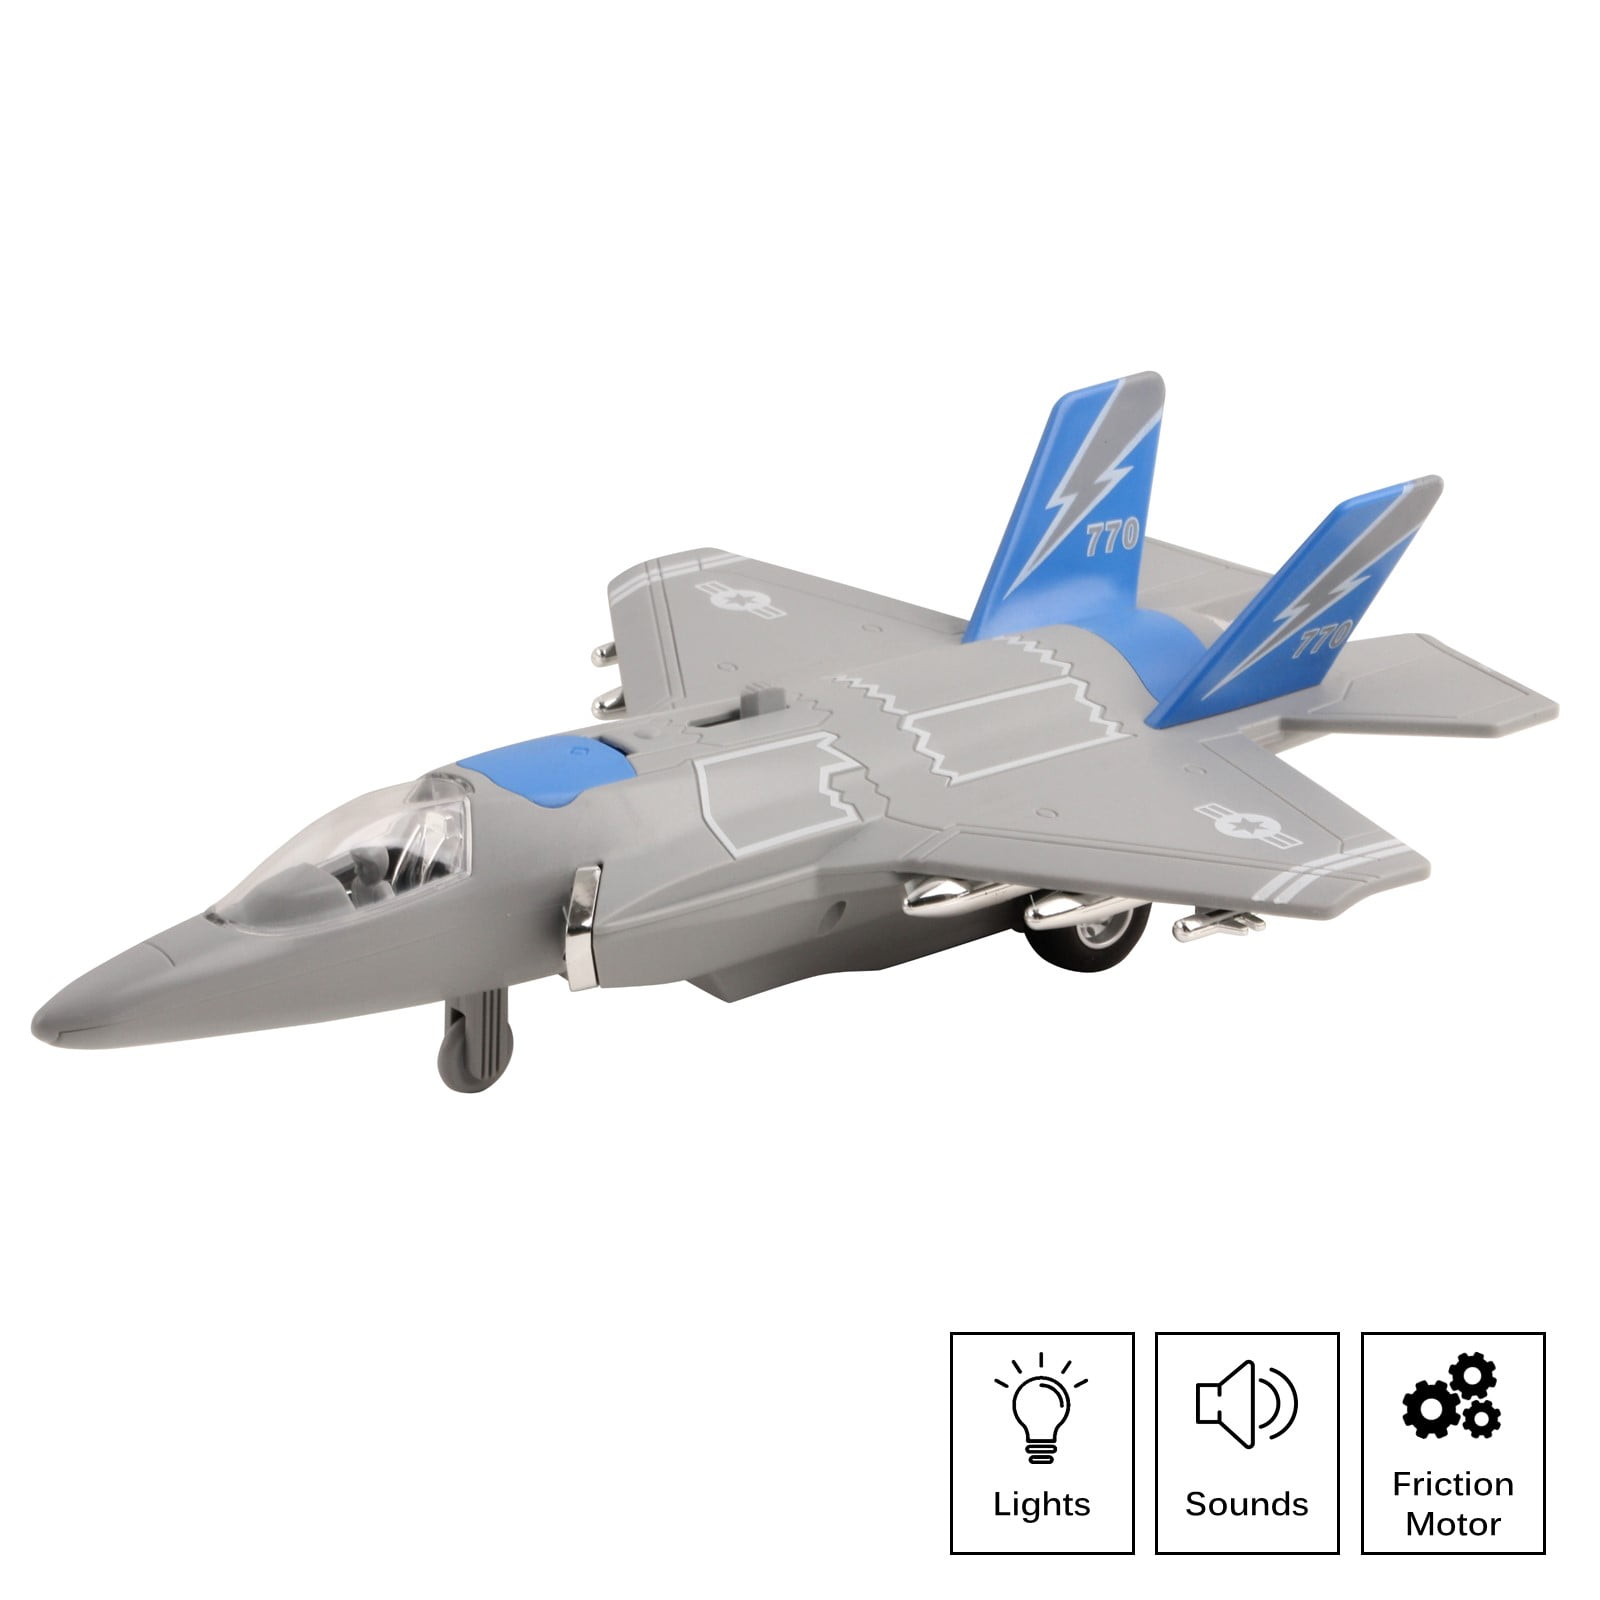 9.5" X-Planes US Navy F-18 Hornet Blue Angel Jet Diecast Toy Authentic Licensed! 